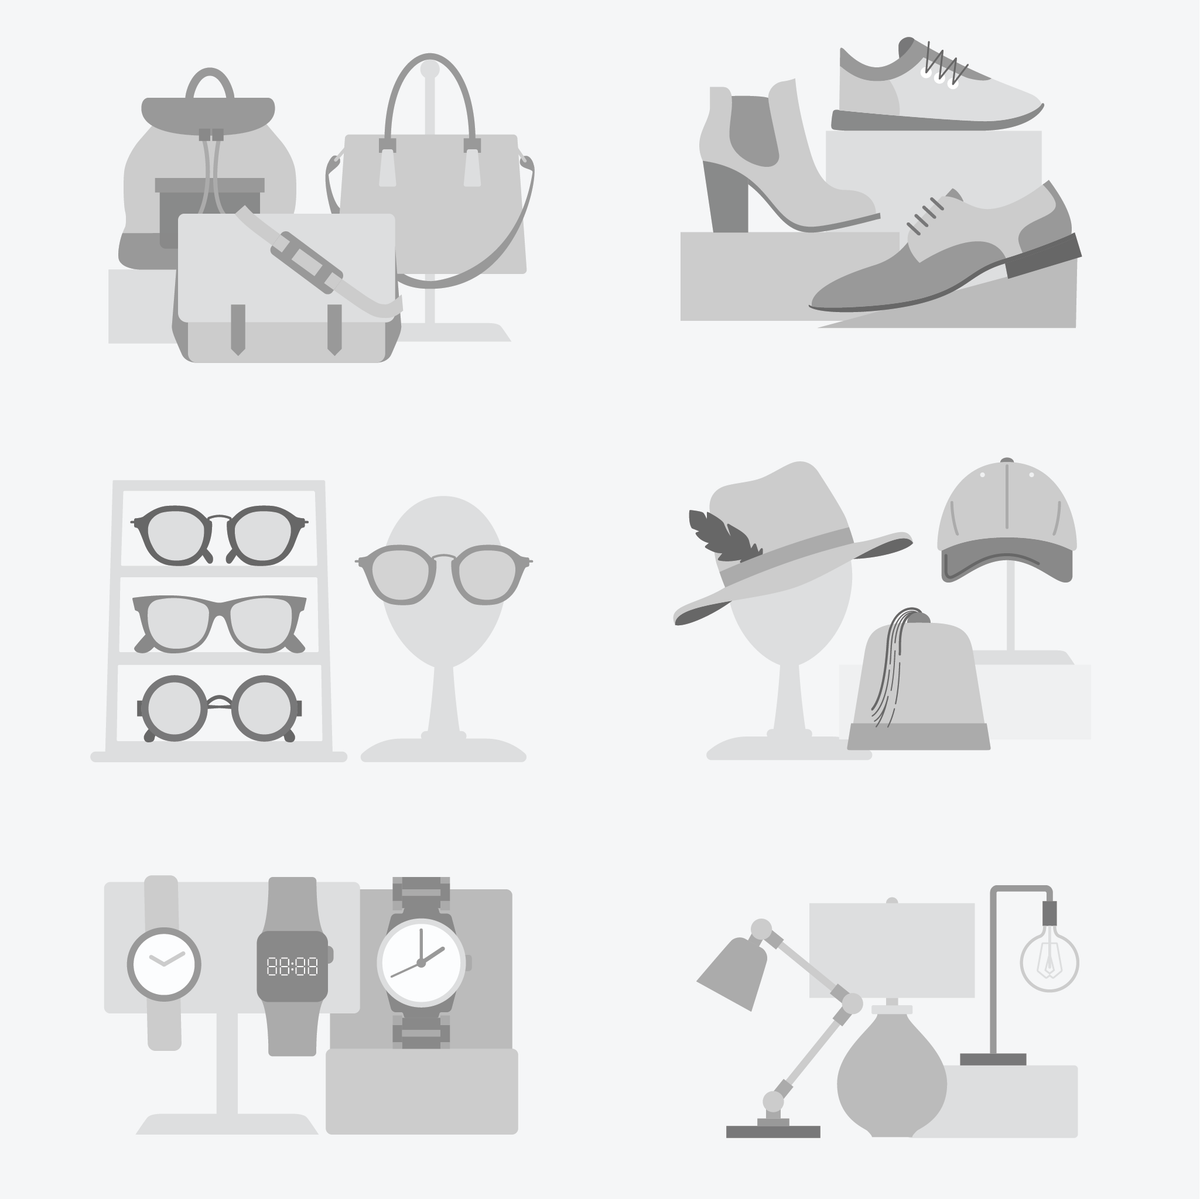 Greyscale vector images for e-commerce collections for bags, shoes, eyeglasses, hats, watches, and lamps.